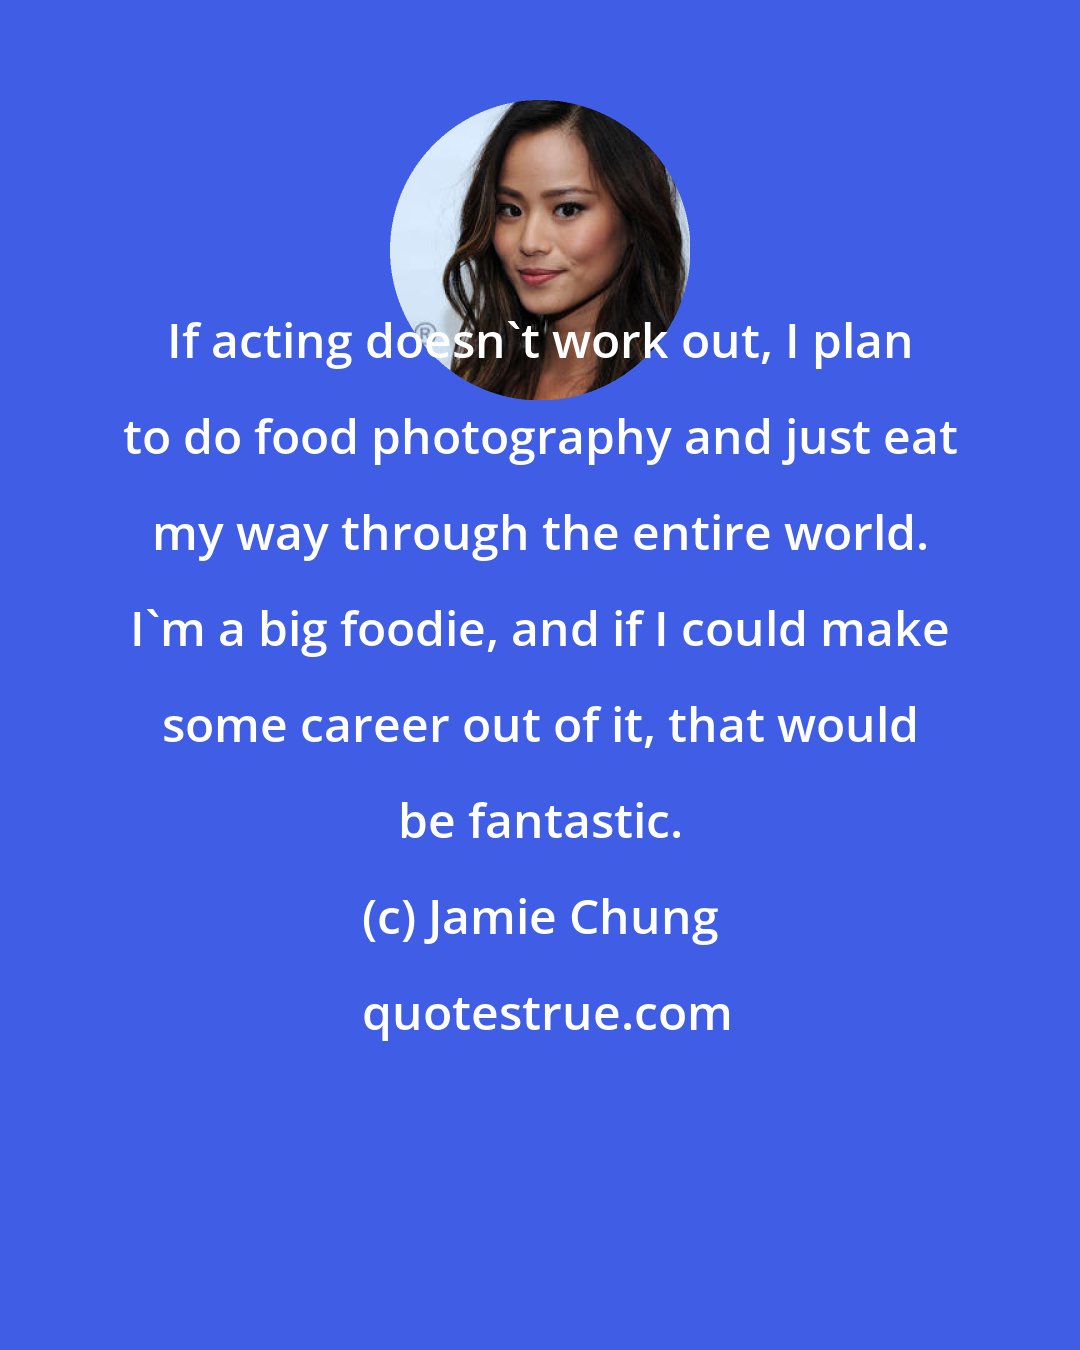 Jamie Chung: If acting doesn't work out, I plan to do food photography and just eat my way through the entire world. I'm a big foodie, and if I could make some career out of it, that would be fantastic.